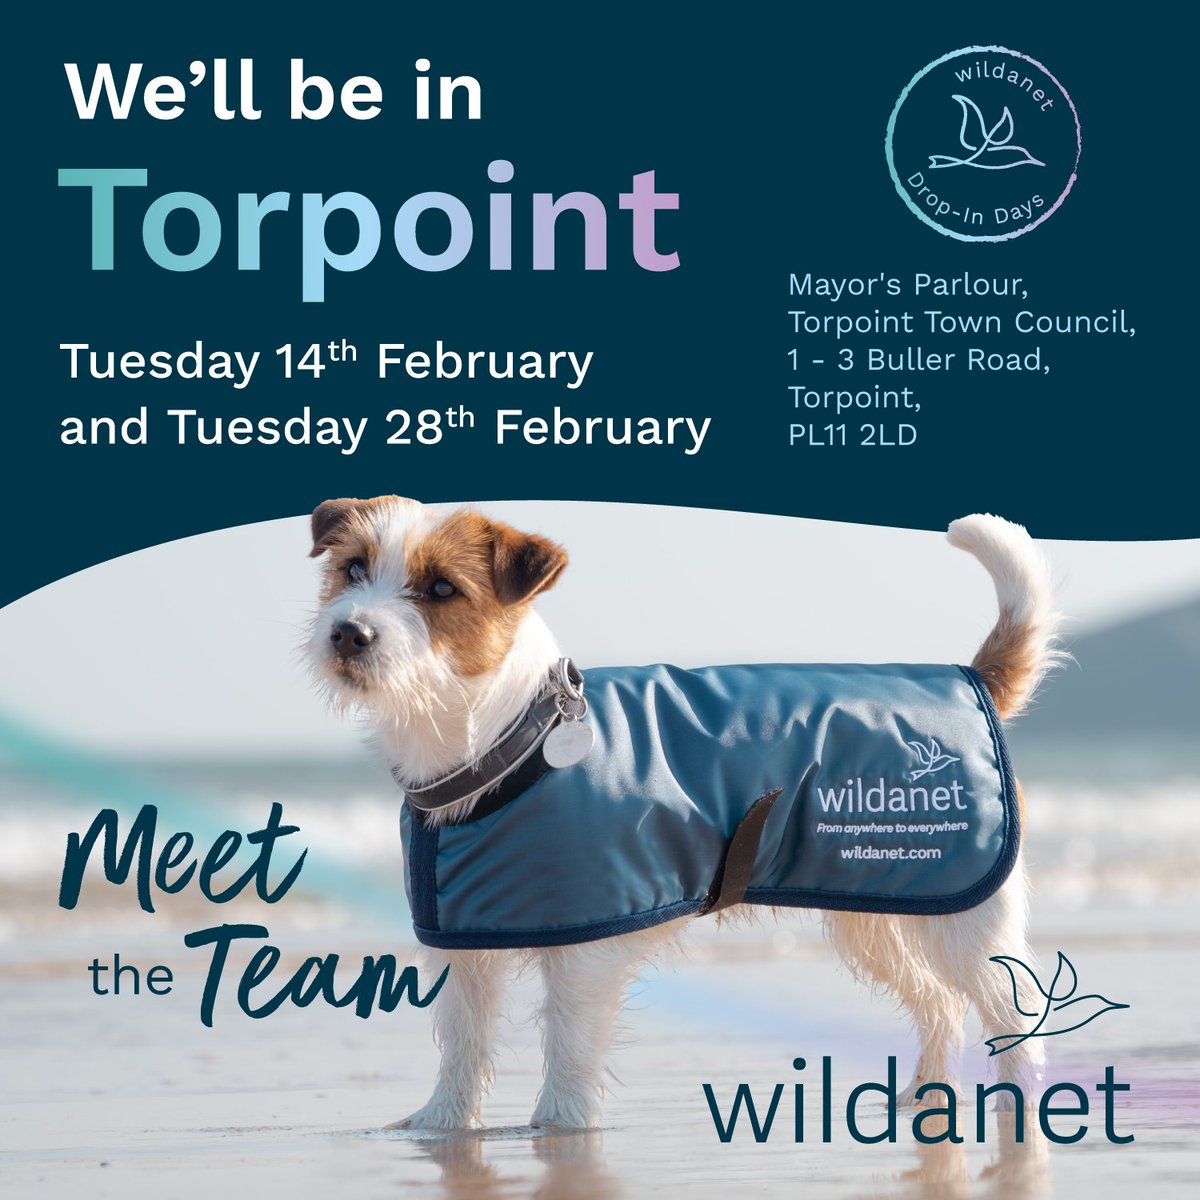 The team will be in Torpoint this Tuesday 14th for a drop-in session from 1pm - 5pm in The Mayor’s Parlour, Torpoint Town Council. Our friendly experts will be on-hand to talk about the benefits of Wildanet’s high speed, full fibre broadband & answer any questions you might have.